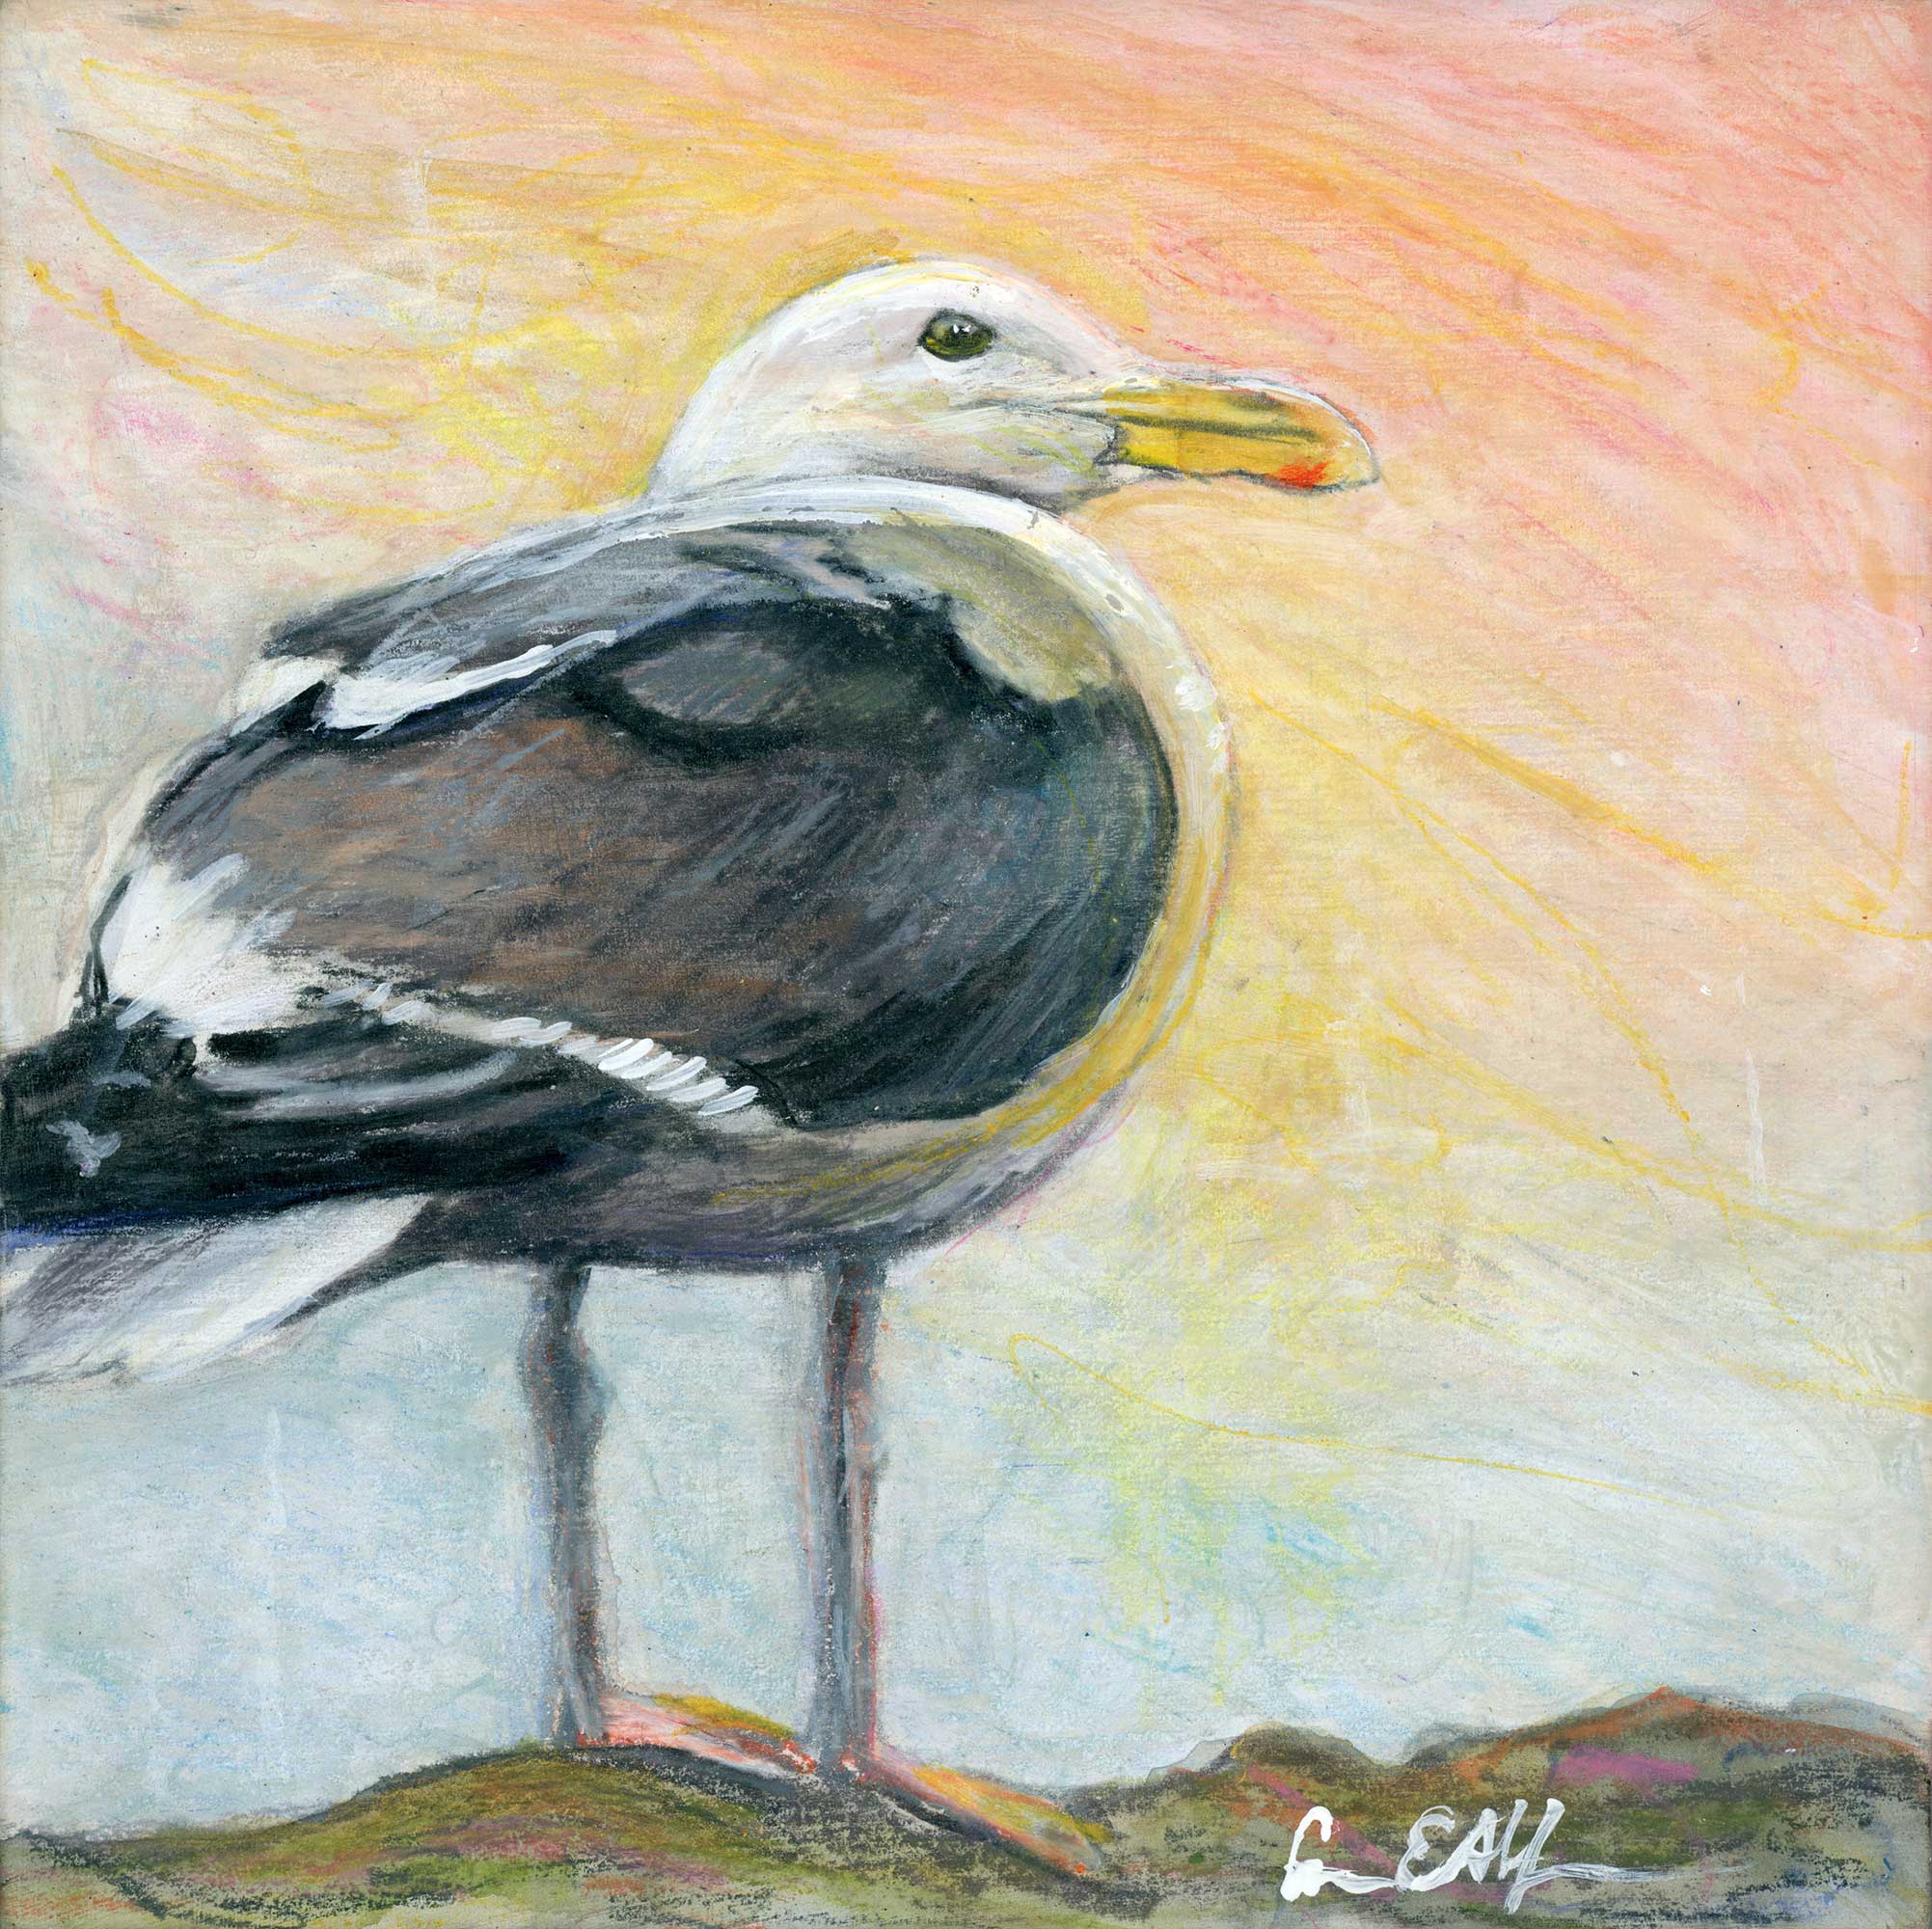 SOLD - "Morning Seagull", 6" x 6", mixed media